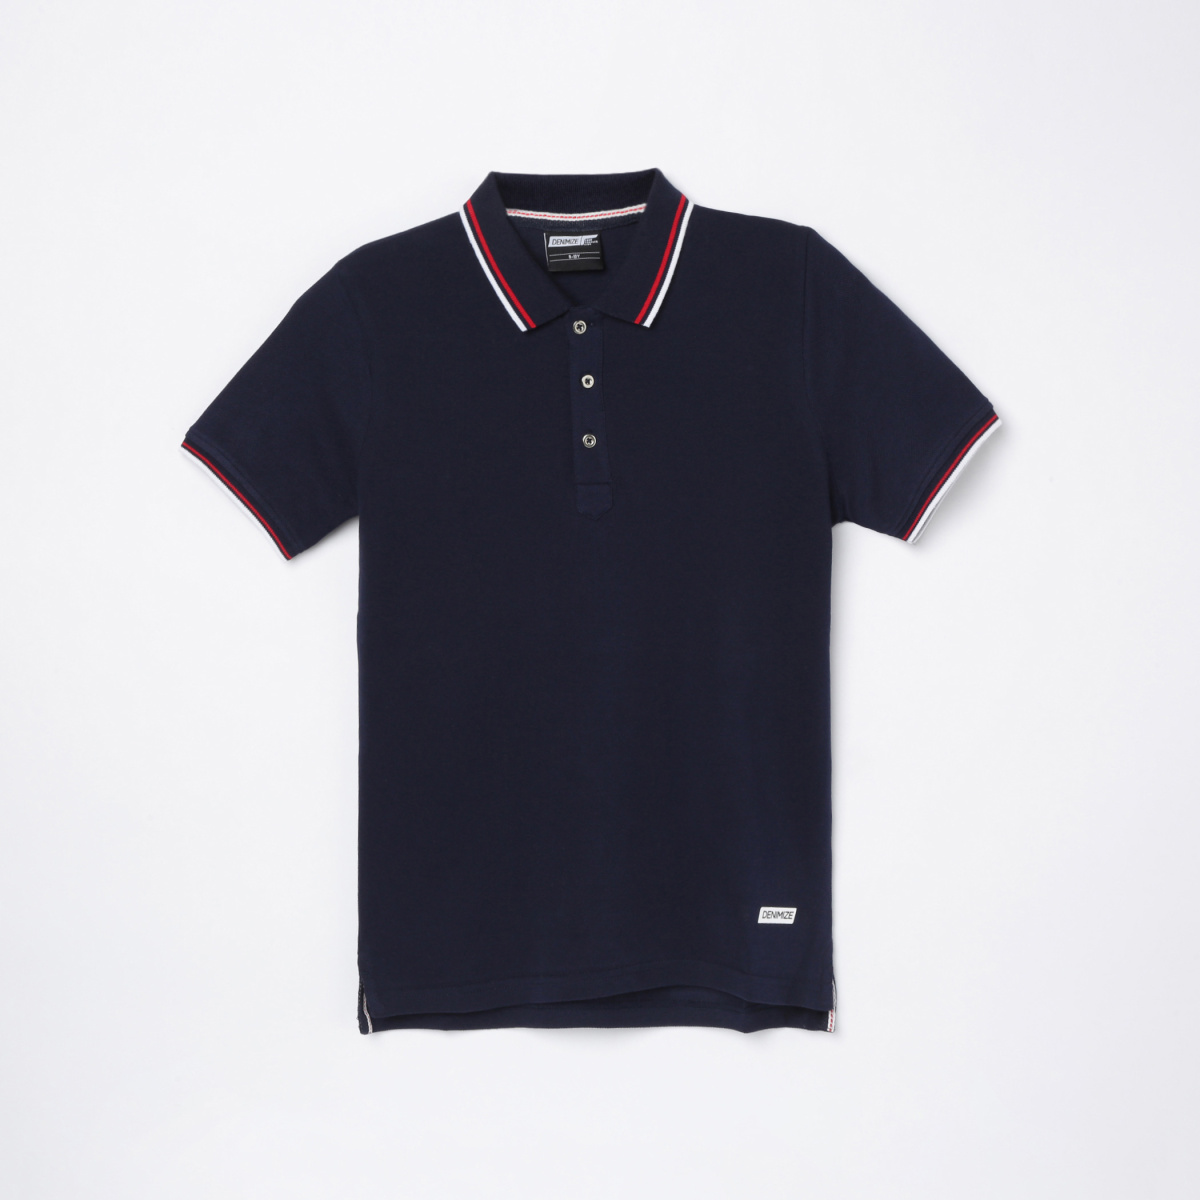 FAME FOREVER DENIMIZE Boys Solid Polo T-shirt